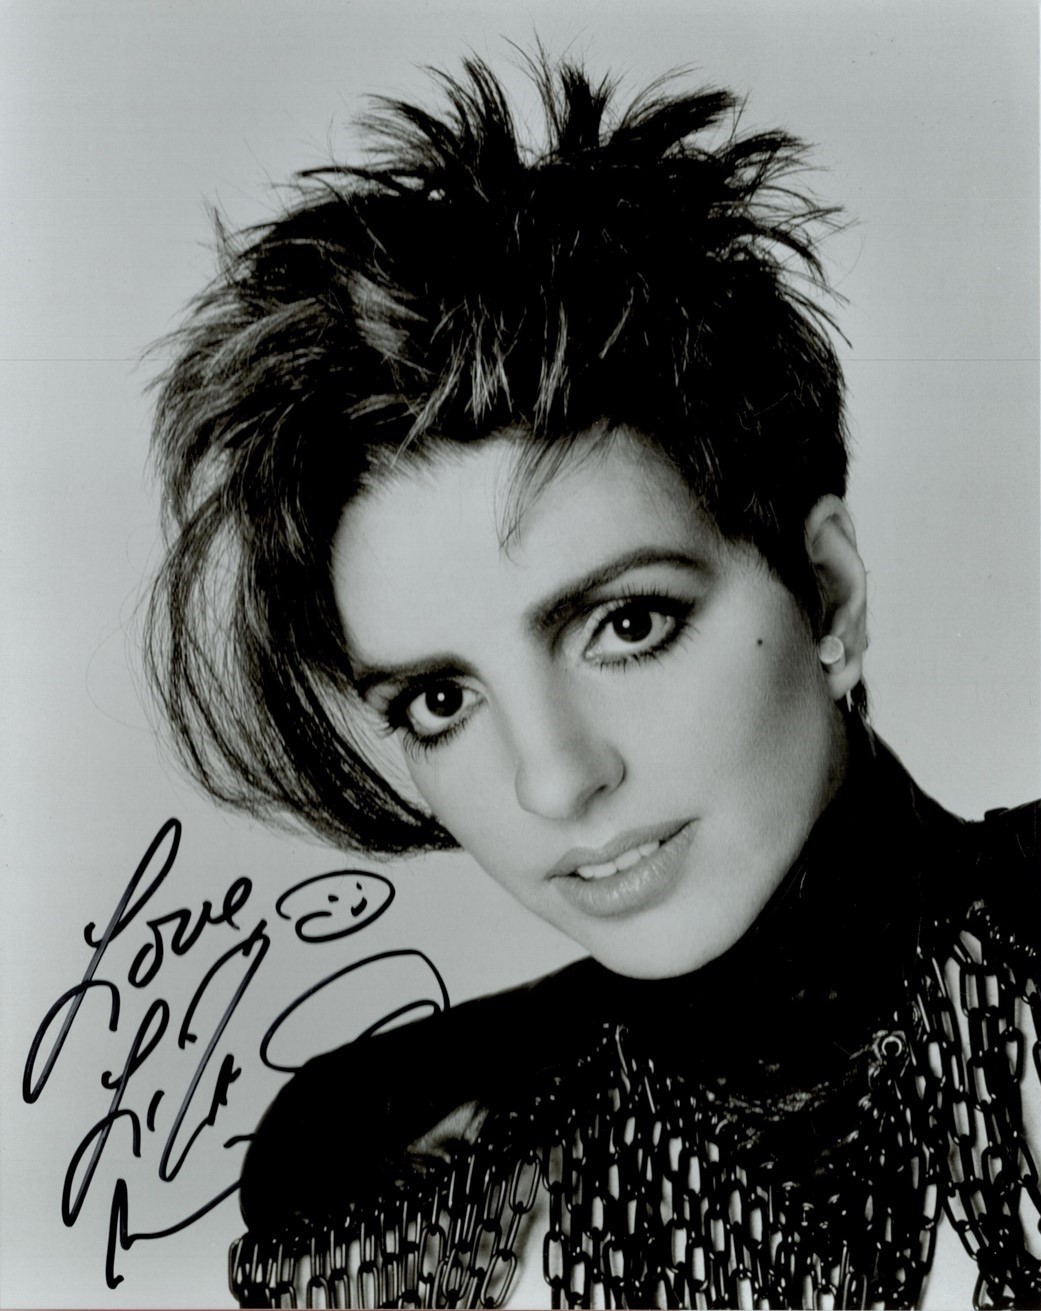 Liza Minelli Signed 10x8 inch Black and White Photo. Signed in black ink. Good condition. All